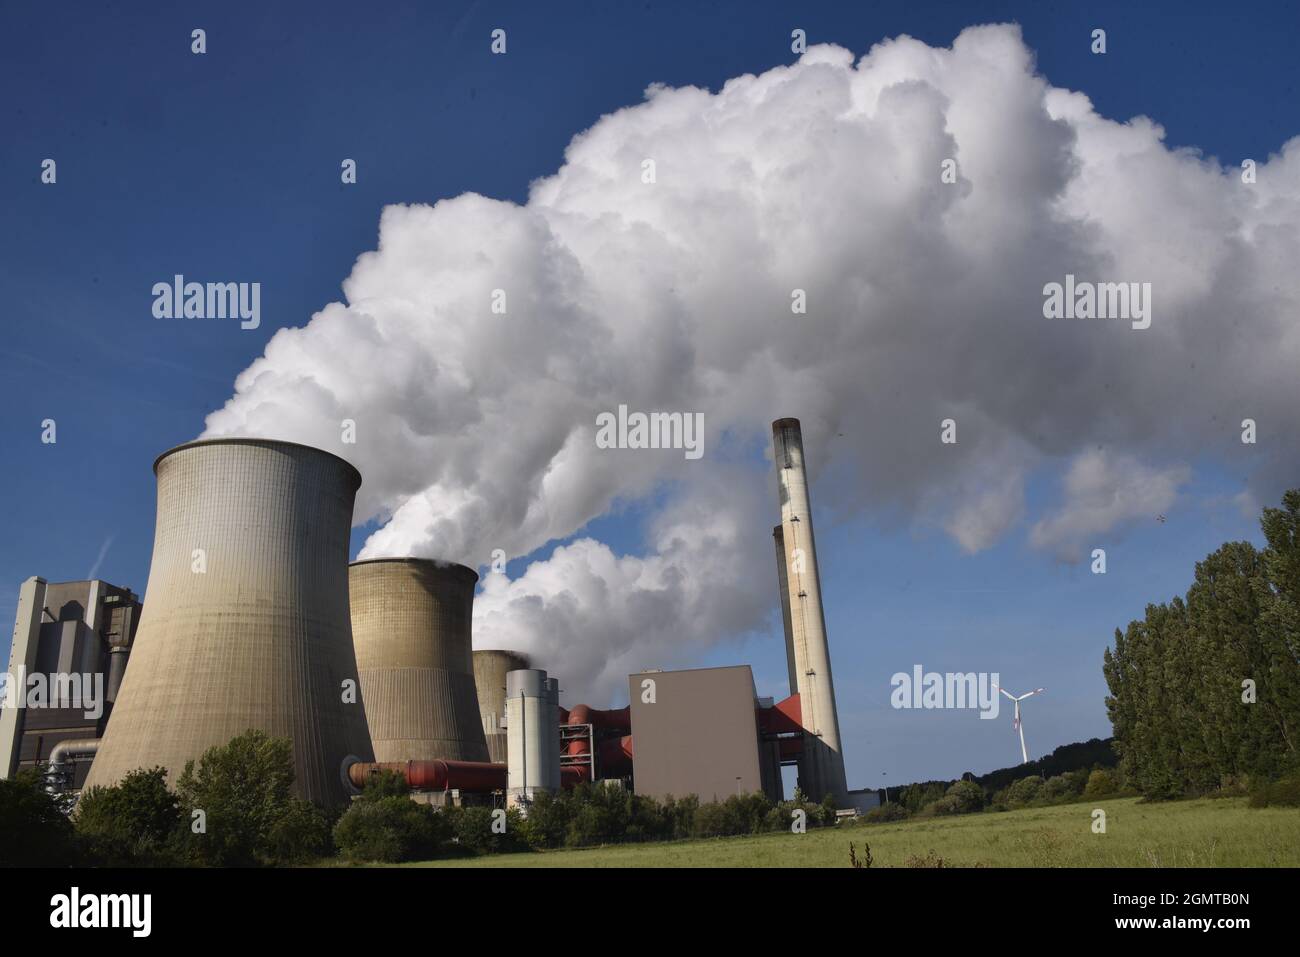 Weisweiler, Germany. 19th Sep, 2021. Thick smoke, cloud of water vapour comes out of the cooling towers of the lignite-fired power plant Weisweiler of RWE Power AG in Eschweiler Weisweiler Credit: Horst Galuschka/dpa/Alamy Live News Stock Photo